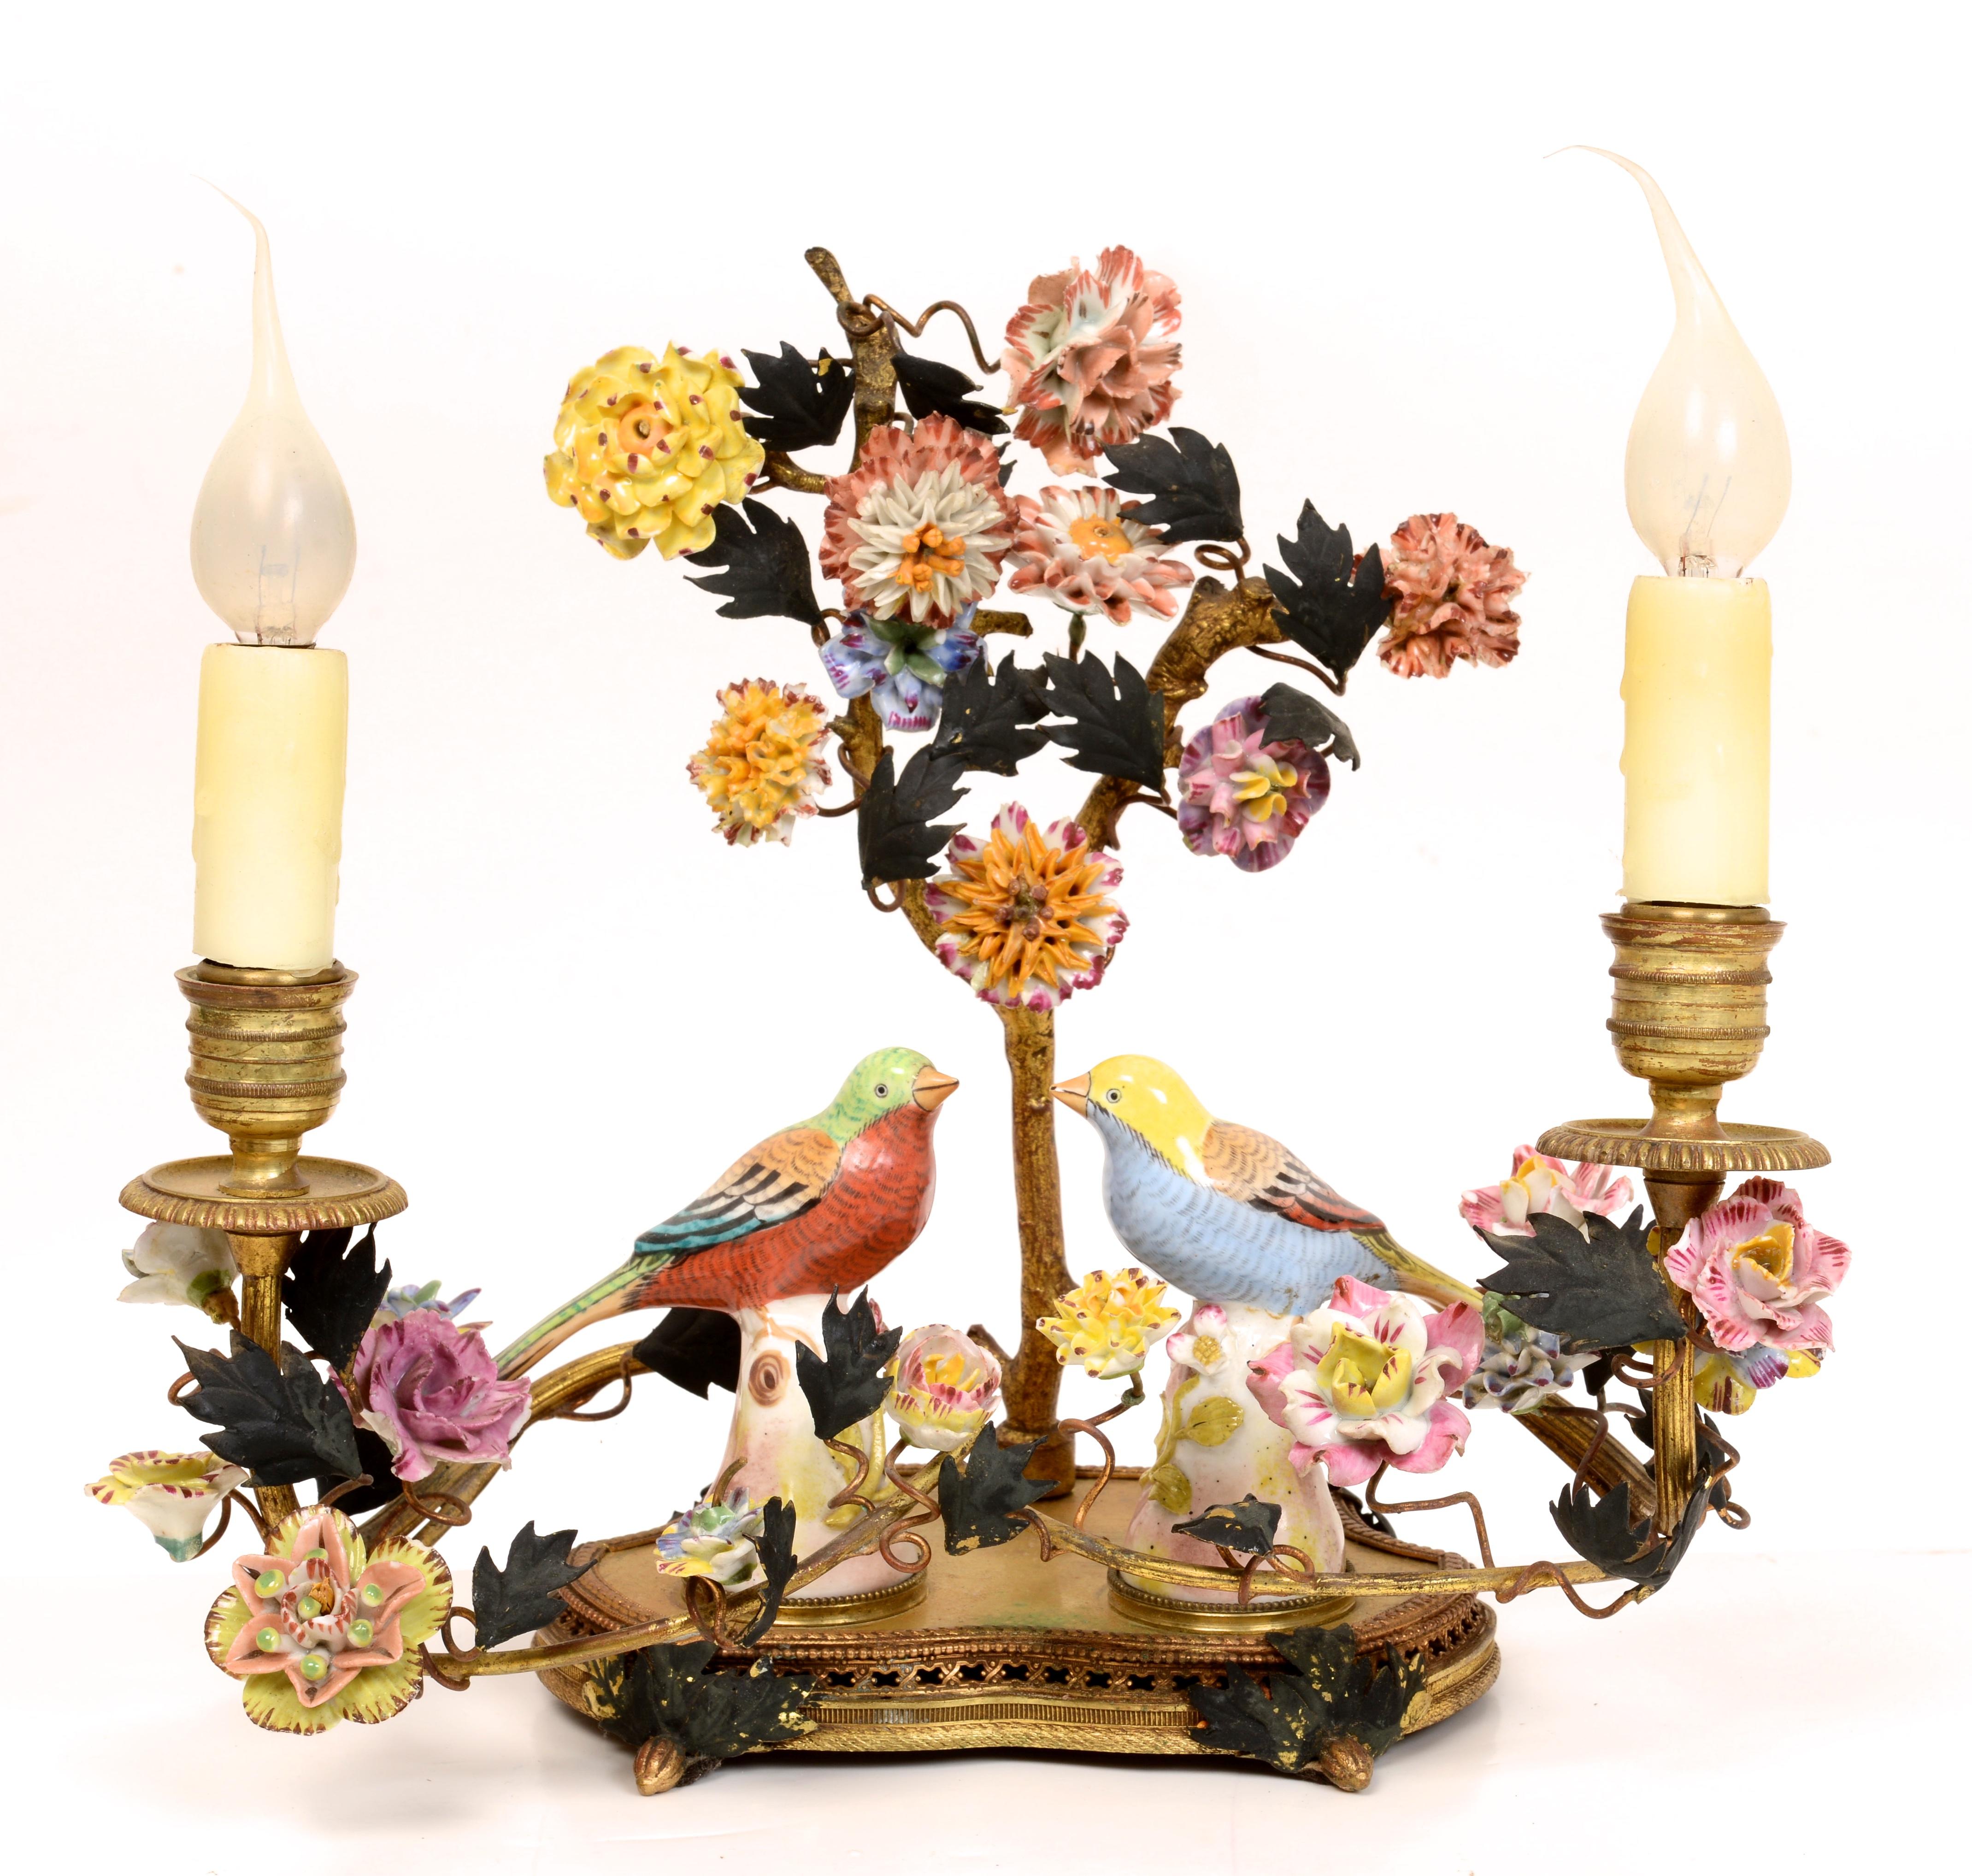 French gilt brass and porcelain boudoir lamp c1920. Ormolu brass or bronze with cold painted details. The back is centered by a tree form with 2 branches and porcelain floral vine. Two candle arms branch out with porcelain flowers on interlaced